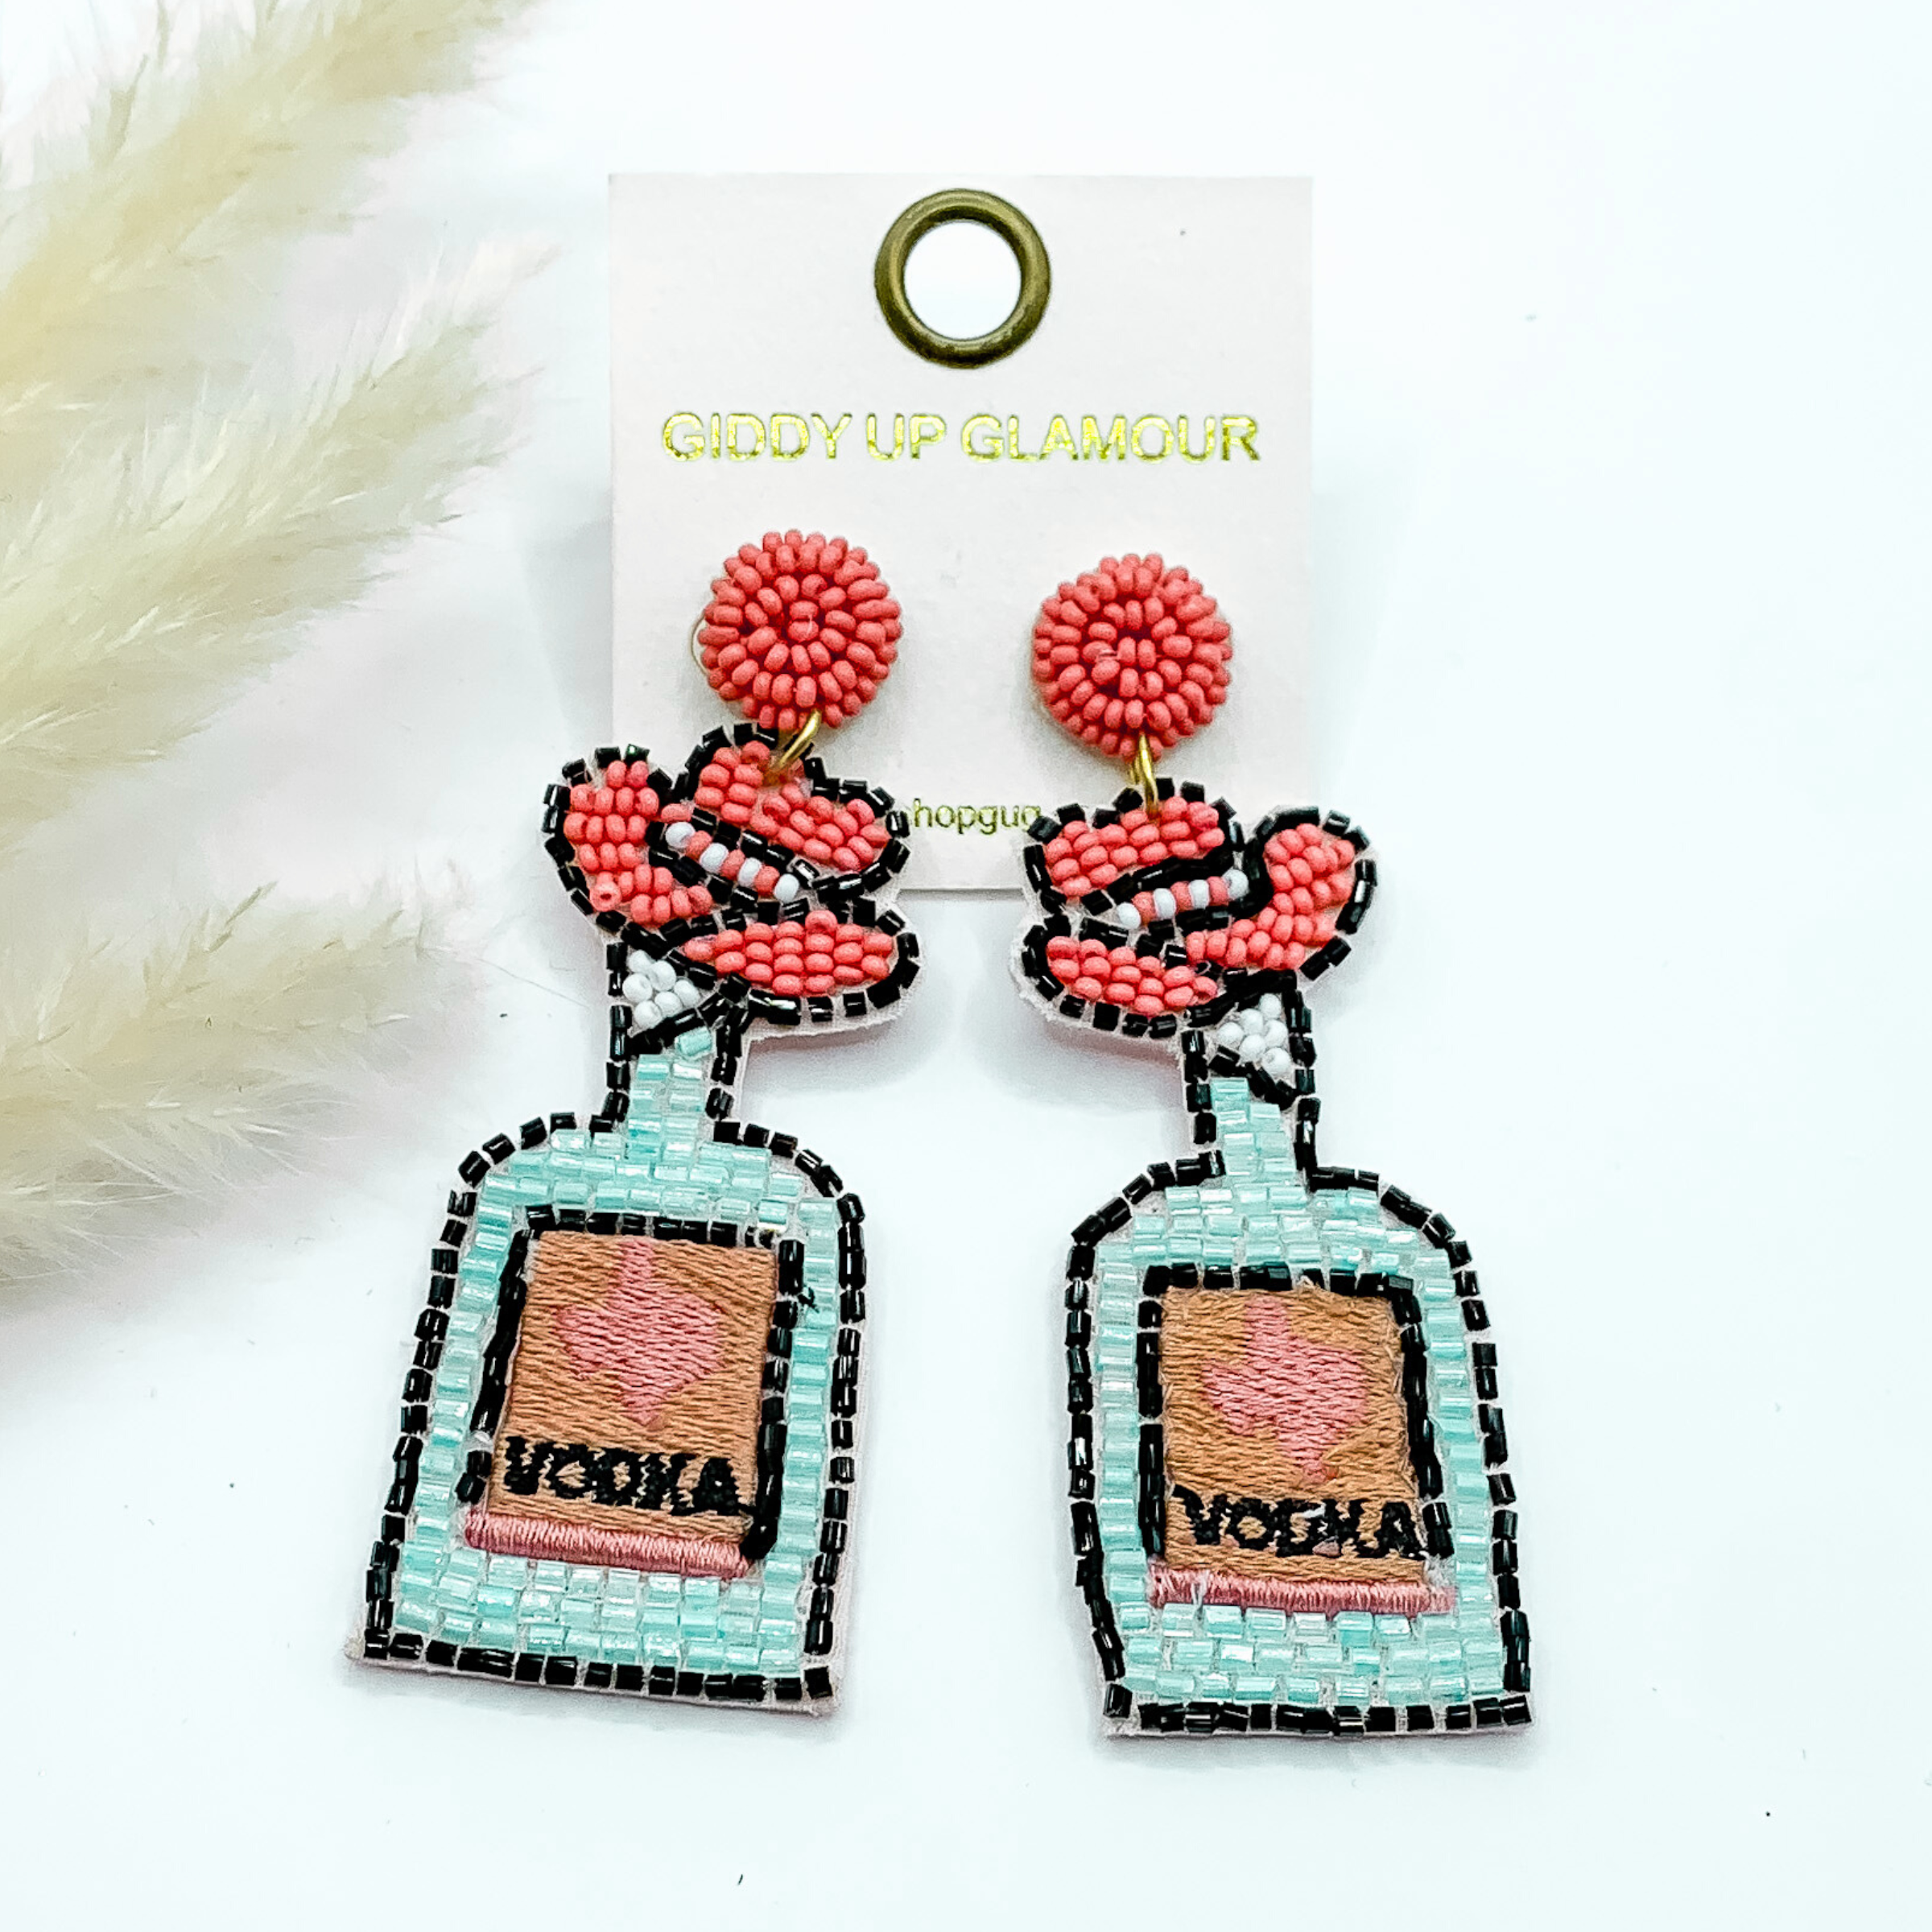 Pink beaded circle post earrings with beaded a pink cowboy hat and bottle pendant. the bottle has a black beaded outline and the word "VODKA" and a pink texas stitched in the center. These earrings are pictured on a white background. 